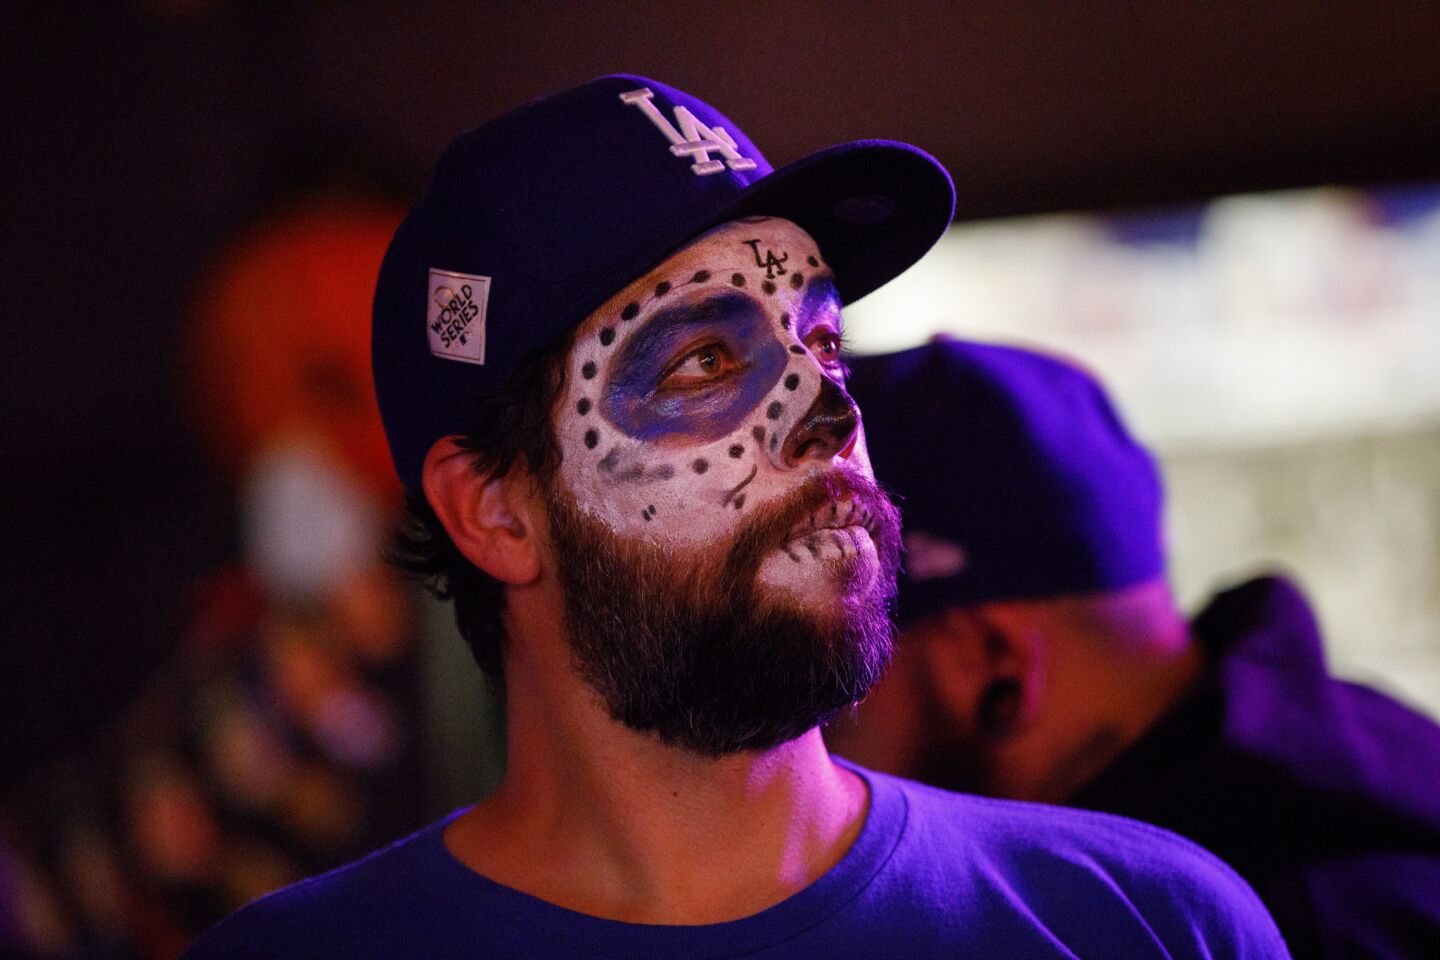 Bartender Nate Joyner wears face paint as he watches the game with Dodgers fans at the Down N Out bar in downtown Los Angeles.